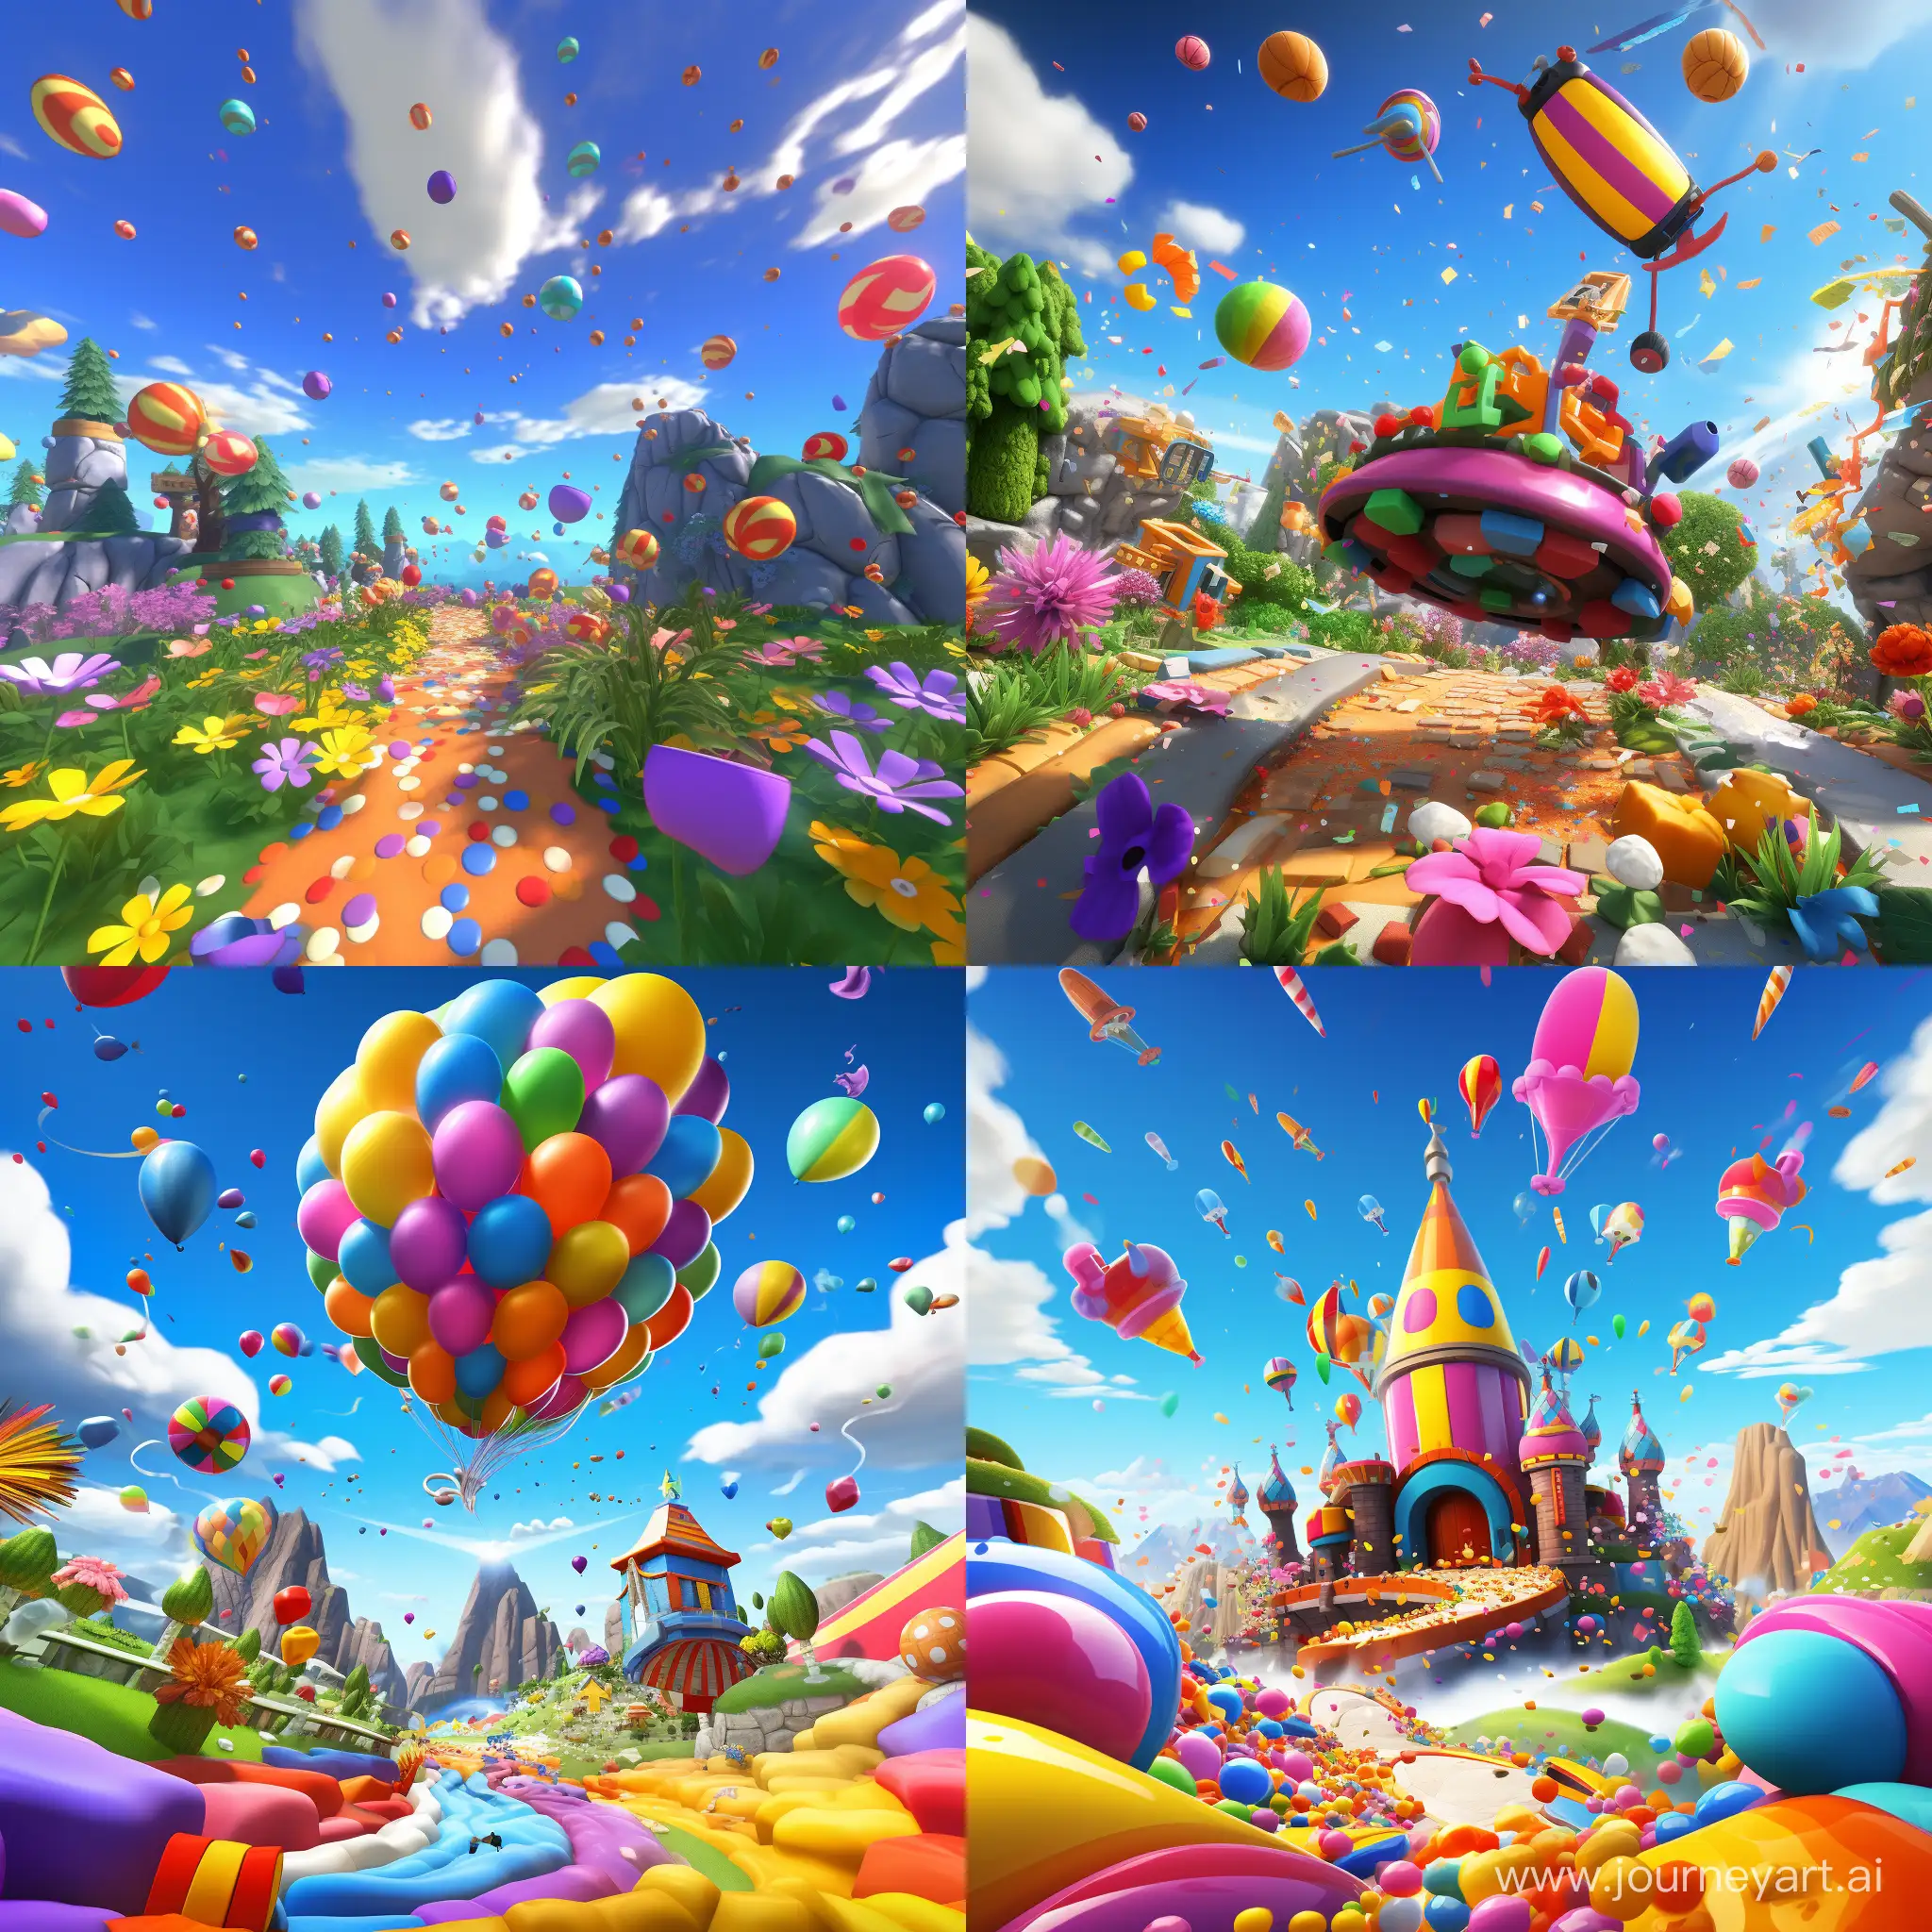 Whimsical-Disasters-Playful-Chaos-in-a-Vibrant-3D-World